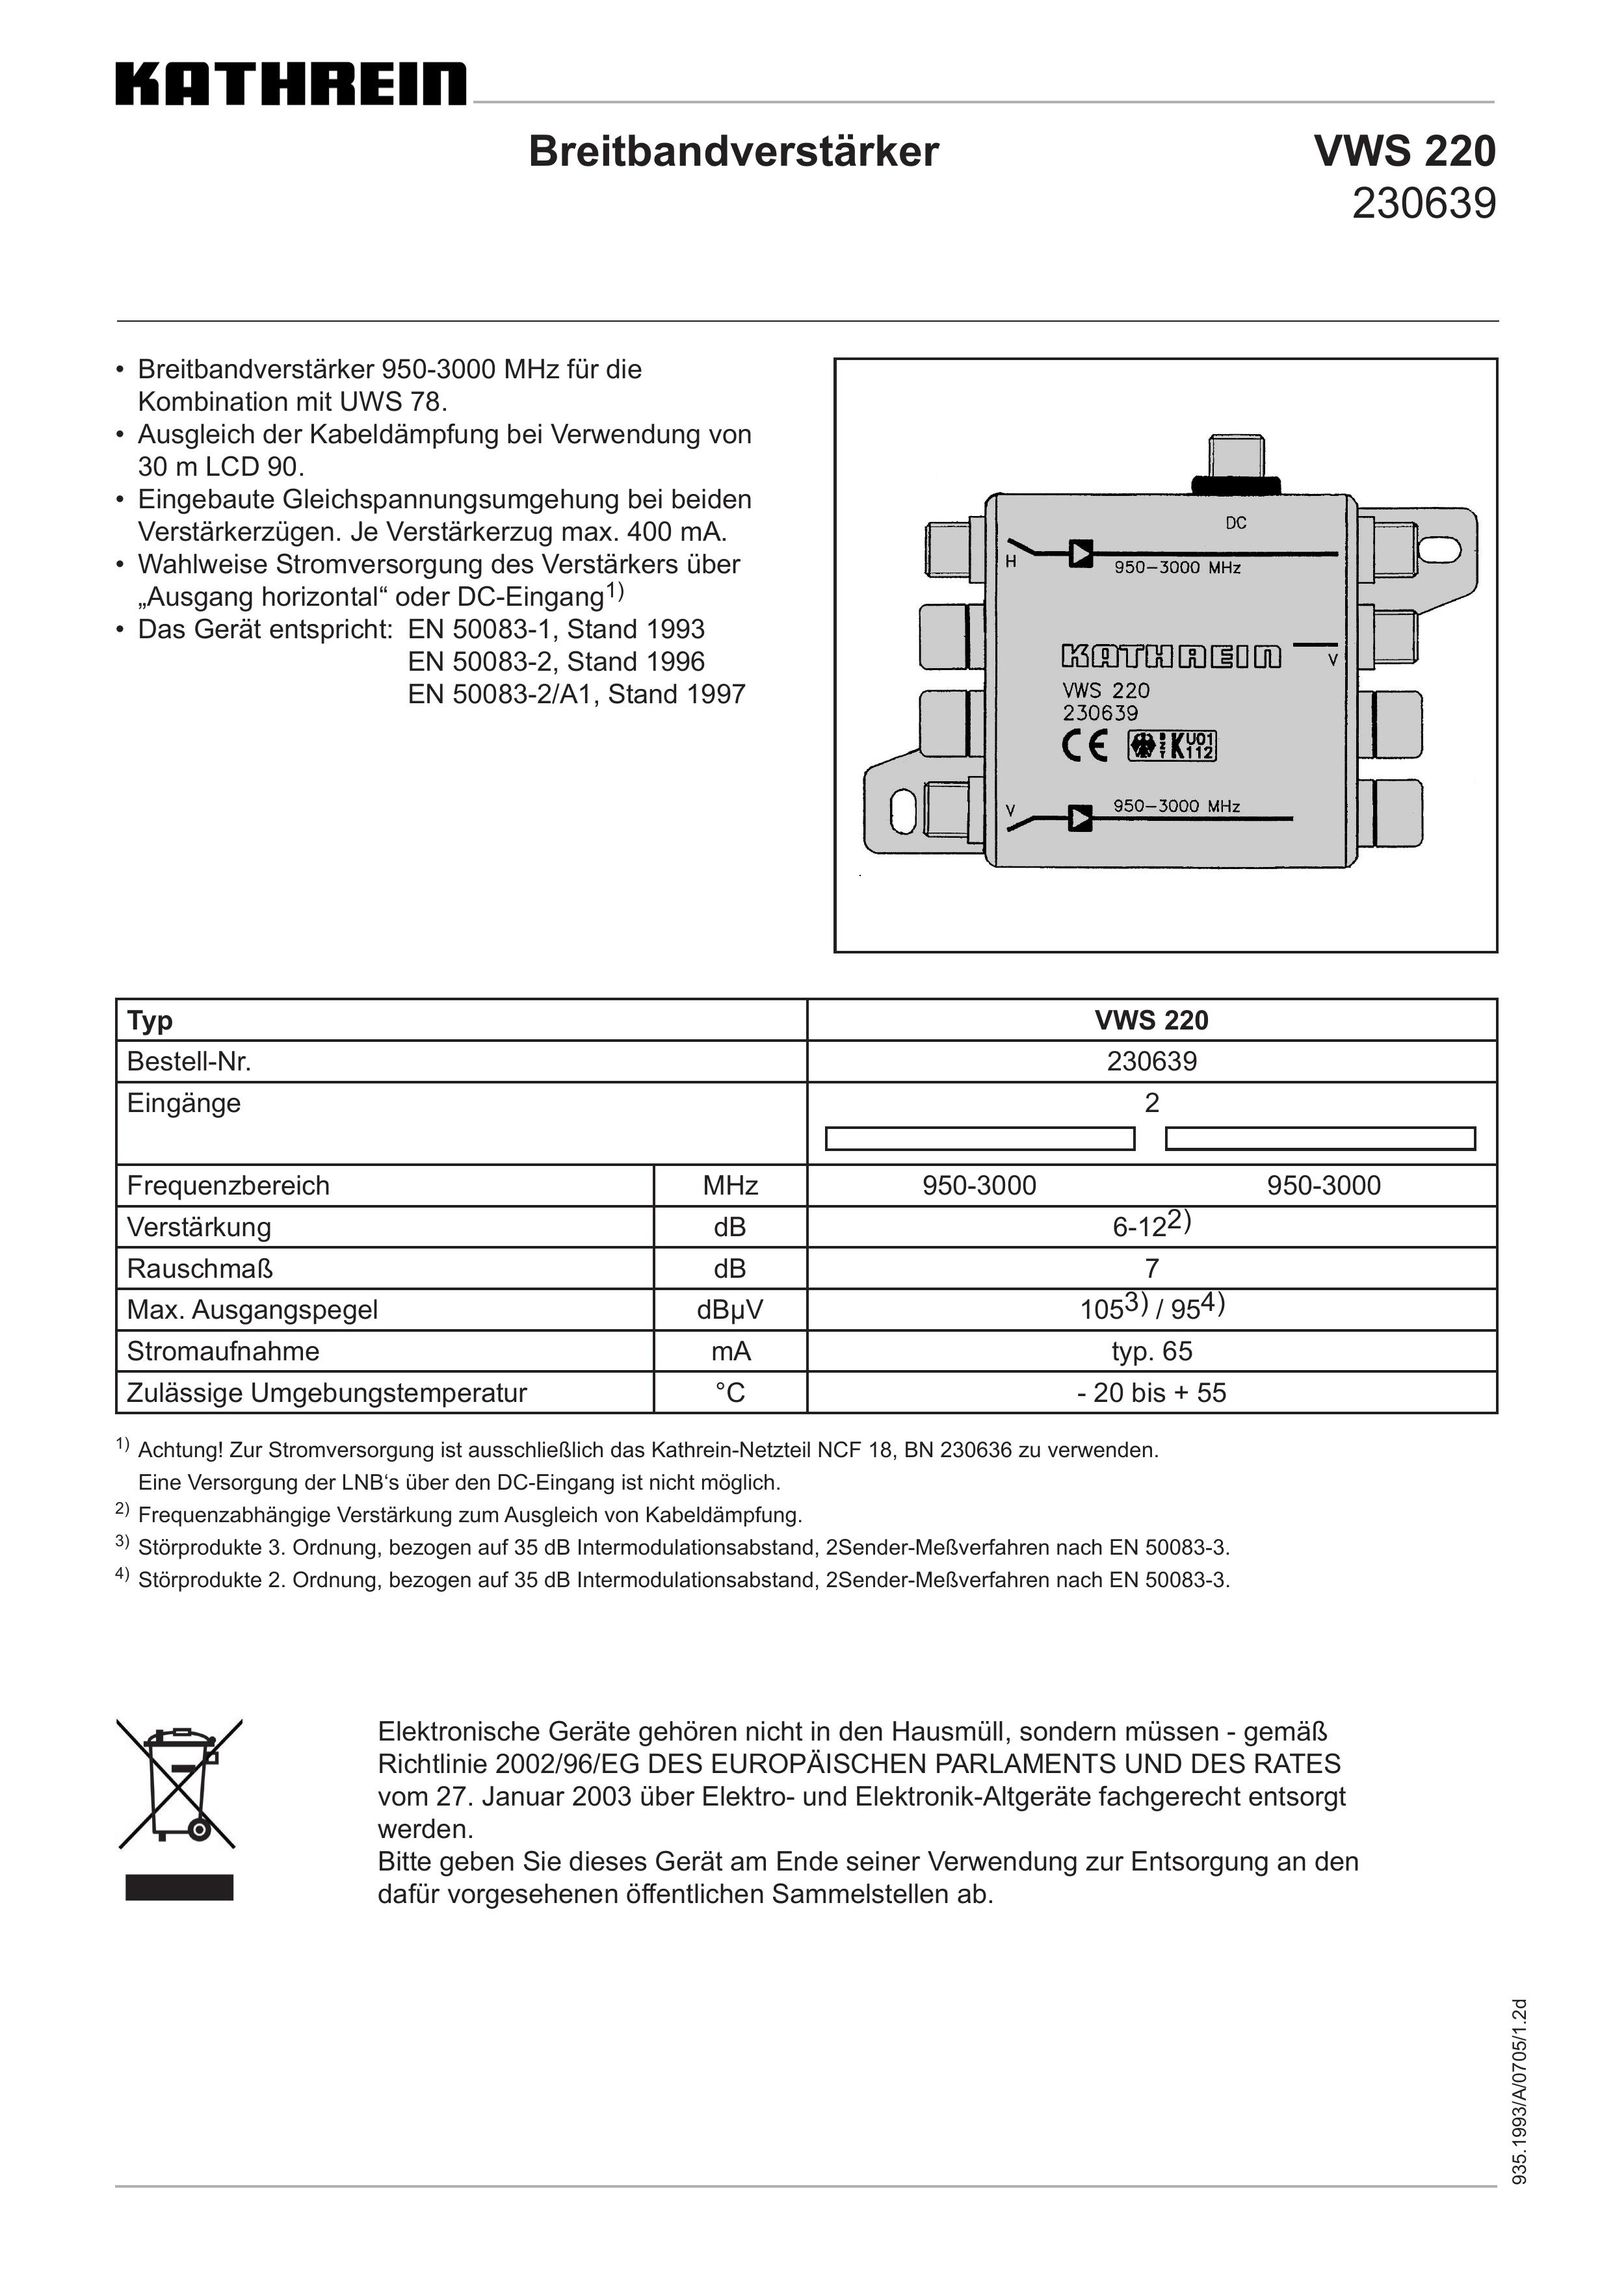 Kathrein VWS 220 TV Cables User Manual